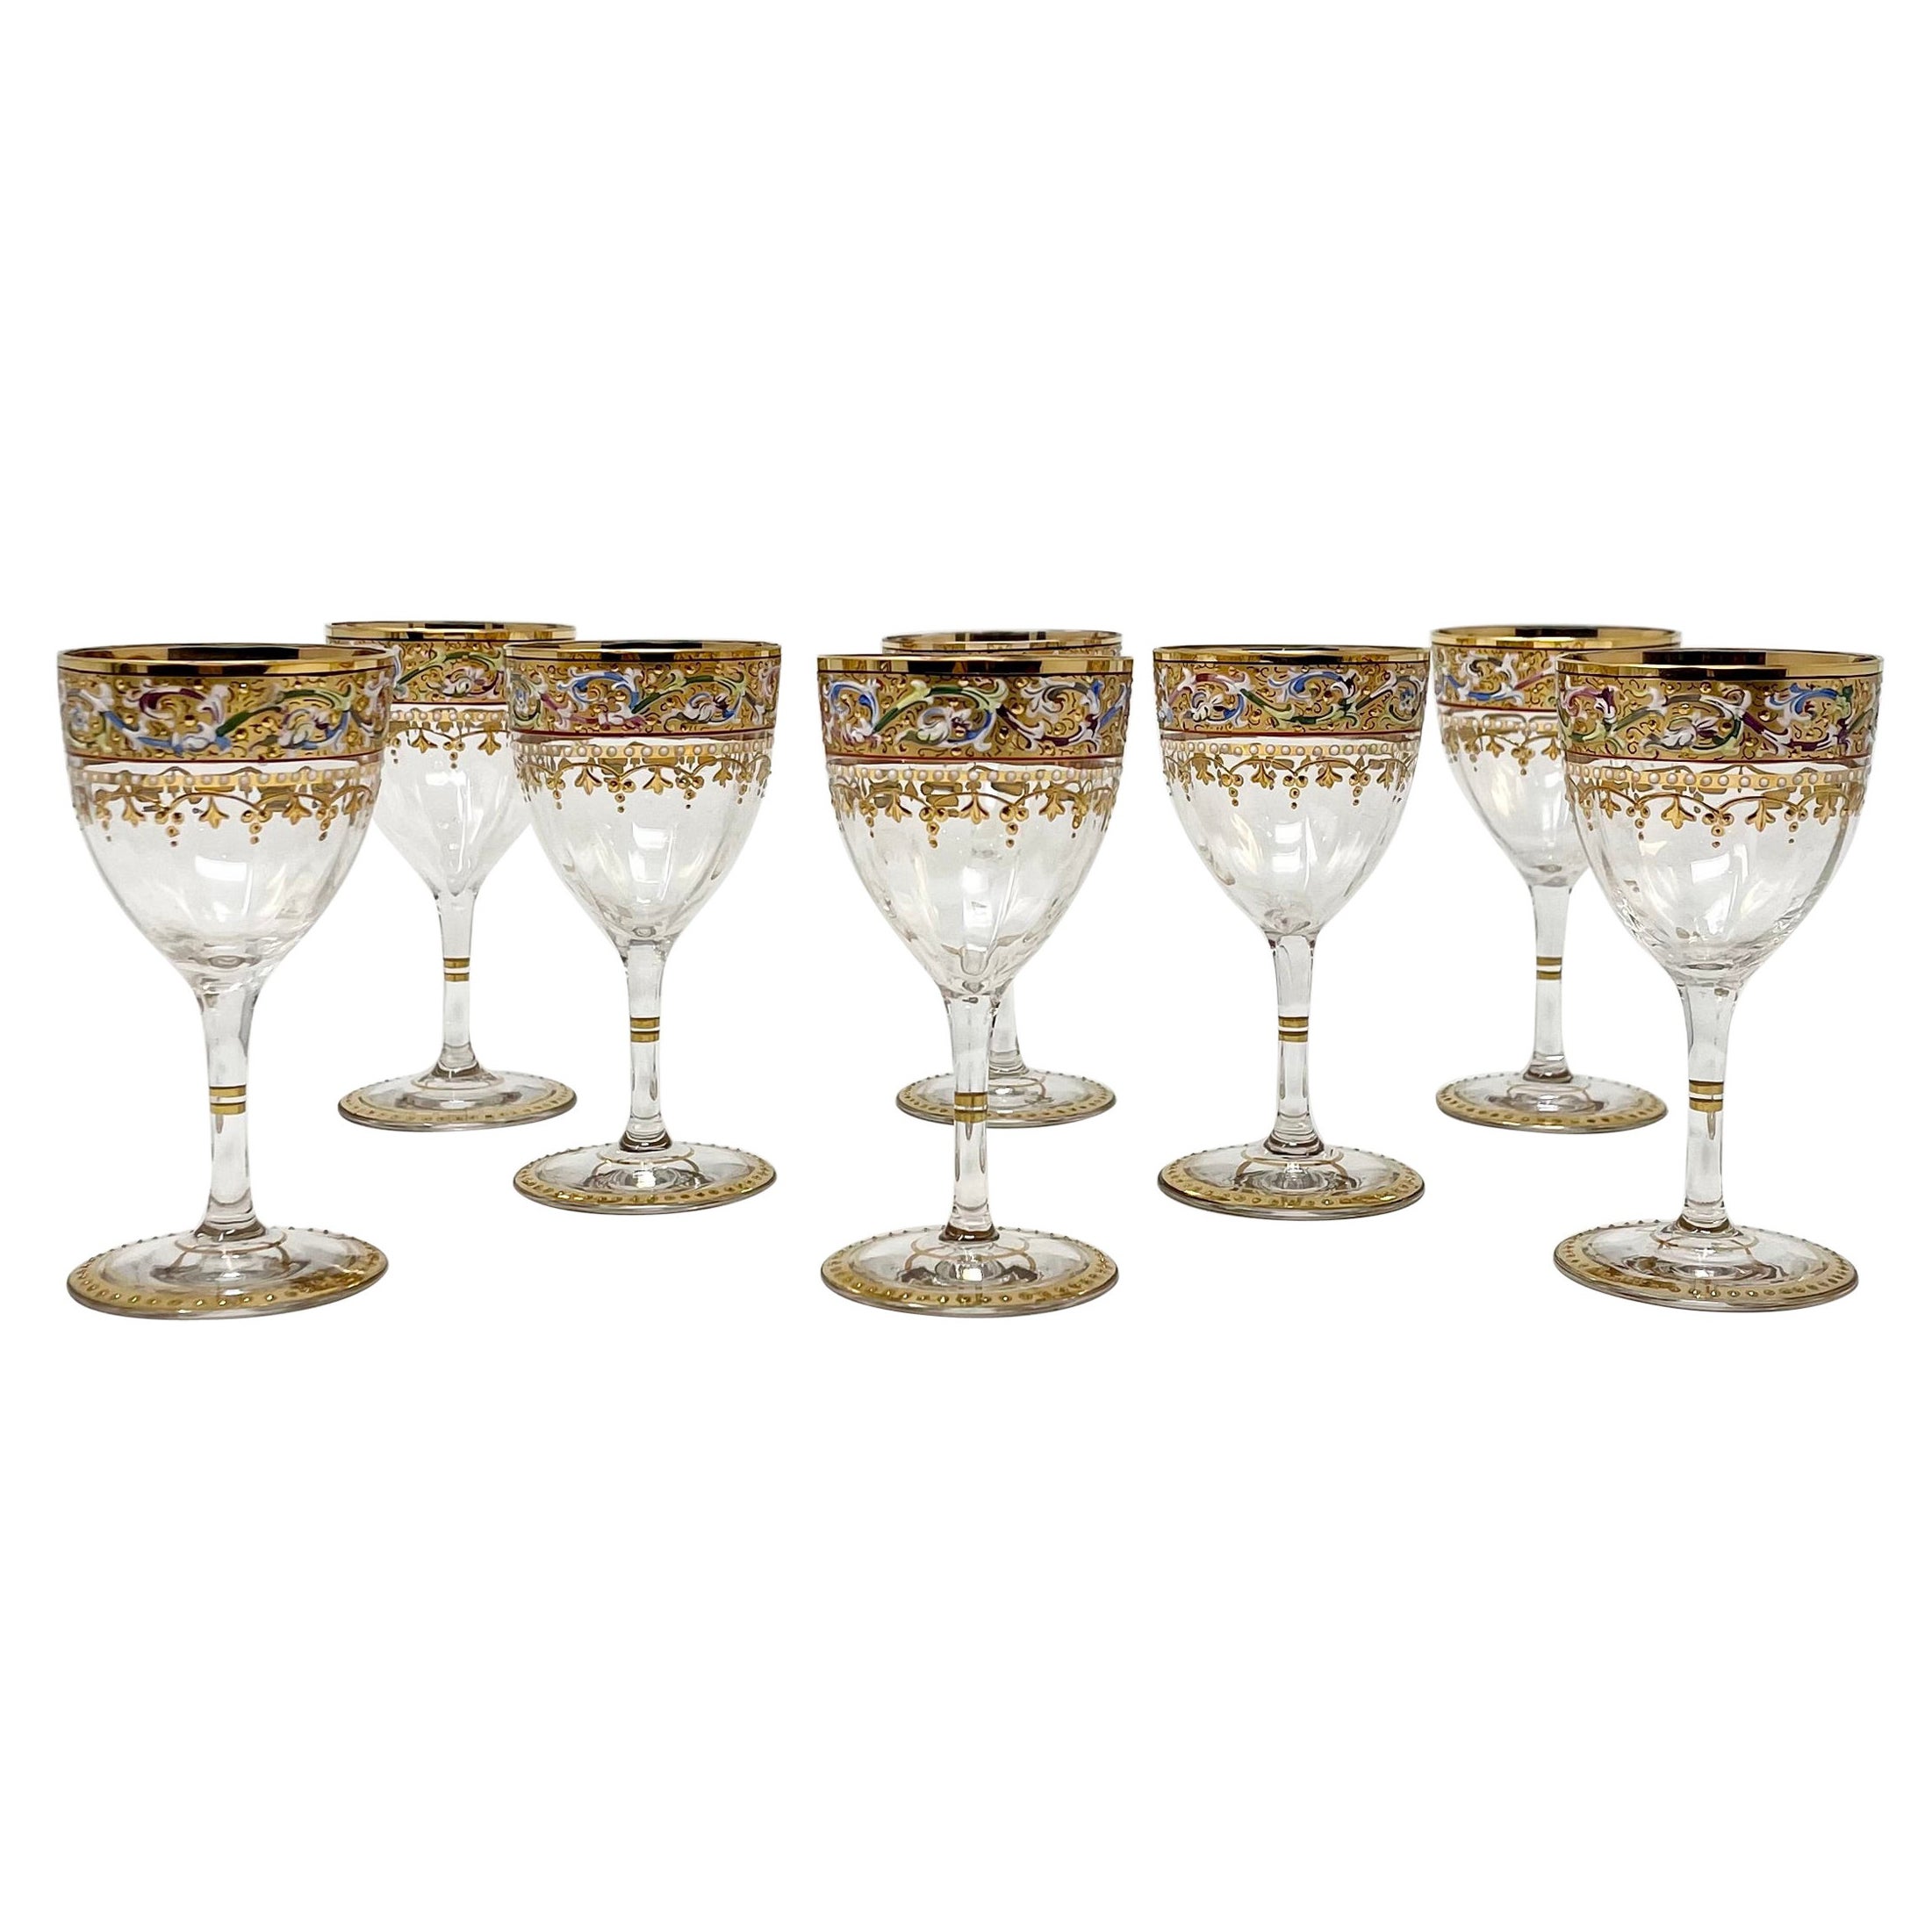 Set of 8 Antique Austrian Moser Glass Hand-Painted Gold-Leaf Cordials, Ca. 1890